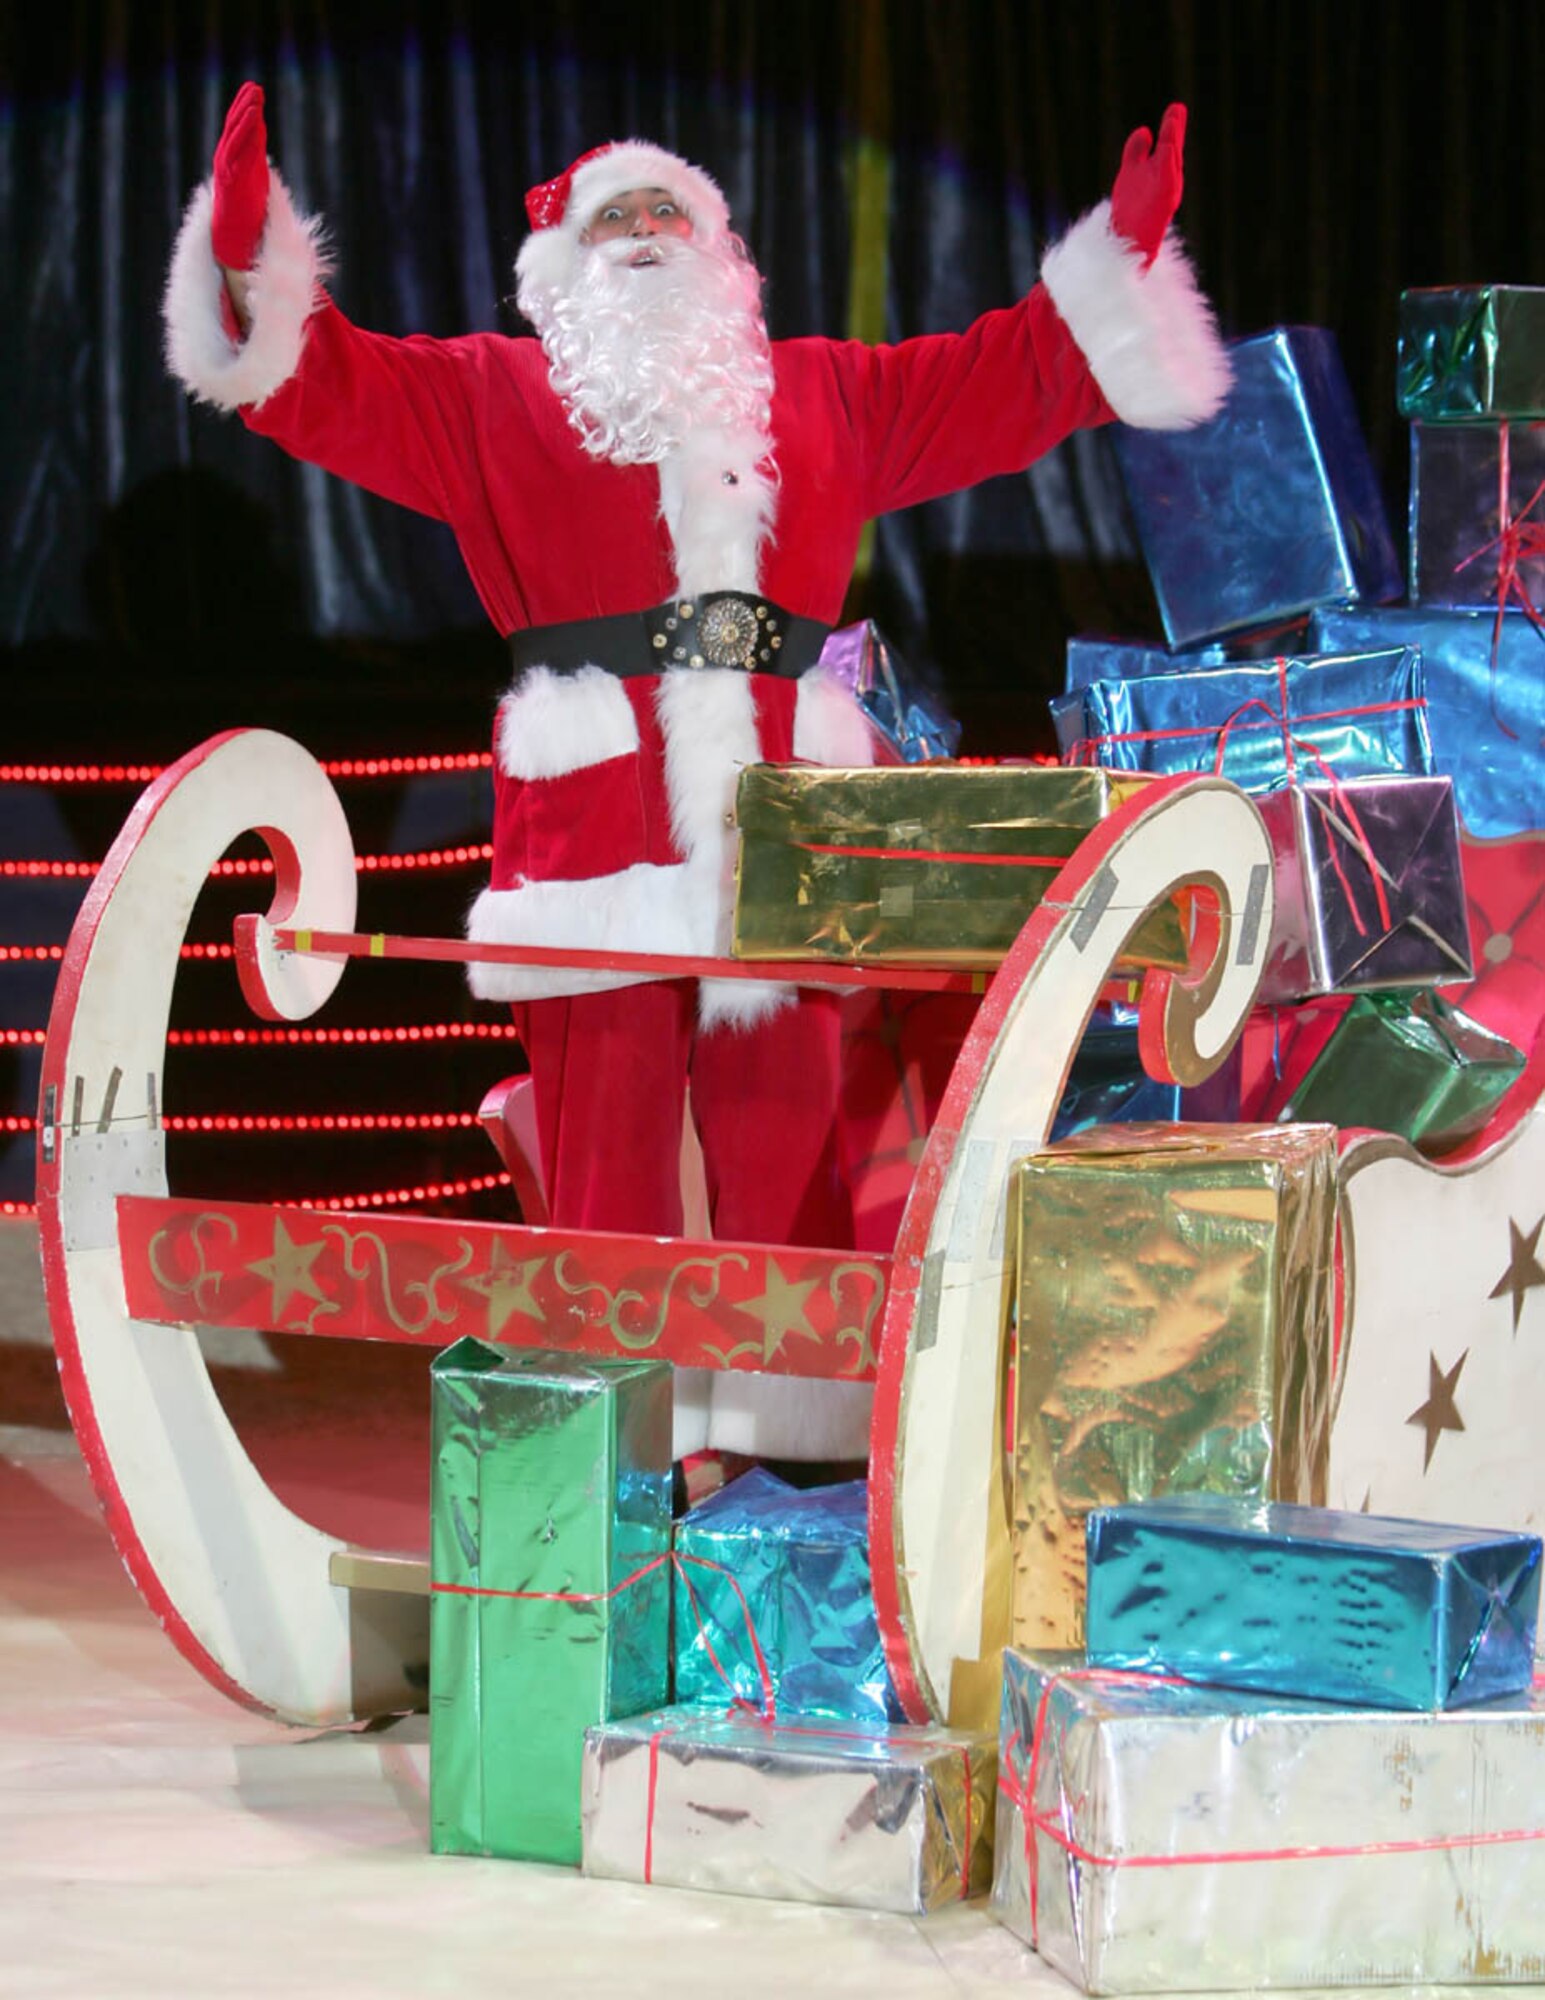 TRIER, Germany -- The Trier Christmas Circus offers shows featuring acrobatic acts, clownery, animal acts and much more Dec. 20 until Jan. 6. Santa will be on hand to celebrate at a holiday party with the circus visitors. (Courtesy photo)